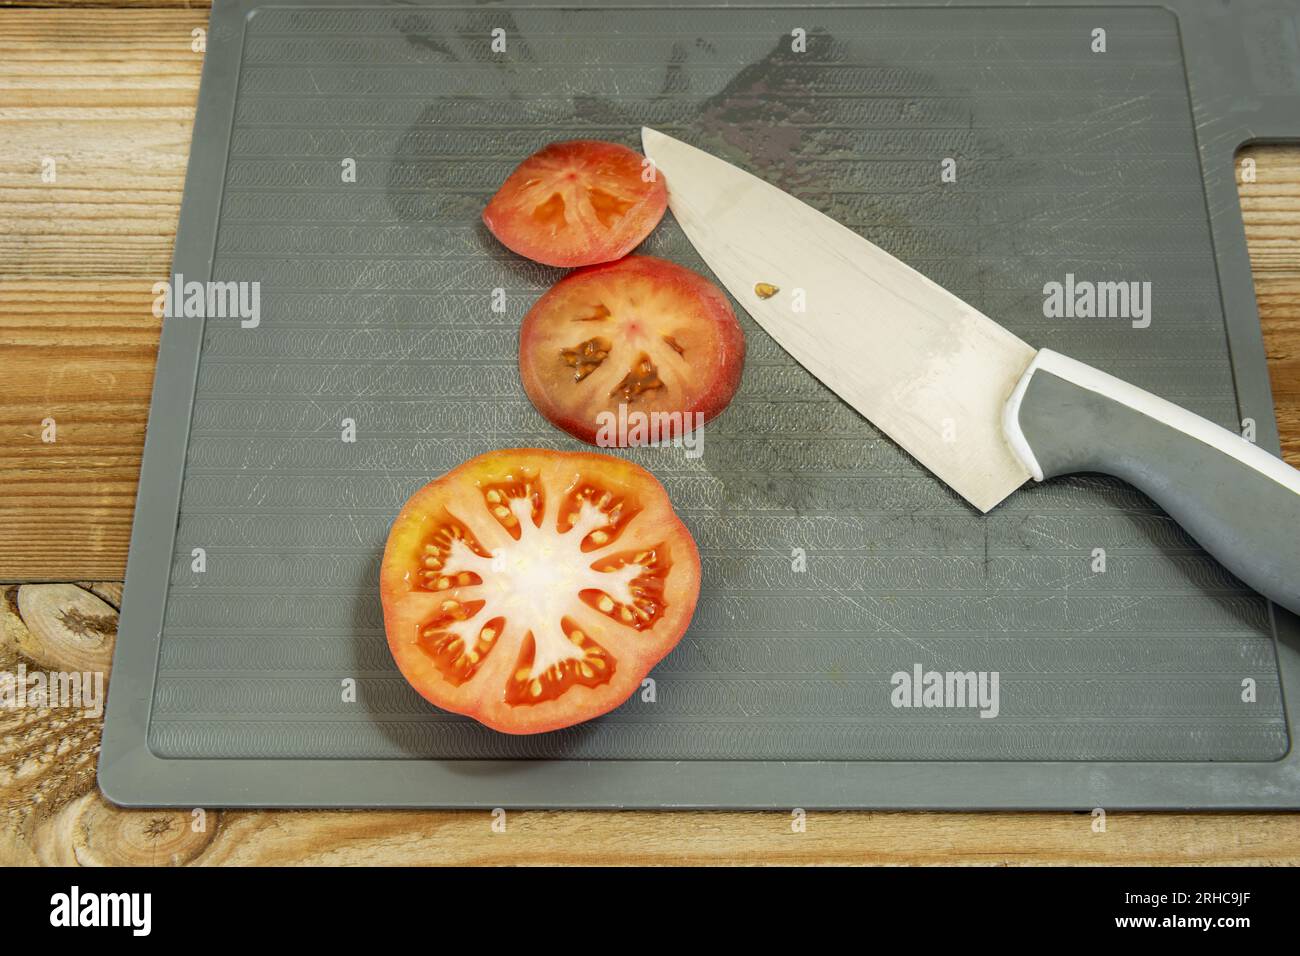 A few slices of ripe tomato cut on a gray synthetic material board with a sharp knife Stock Photo